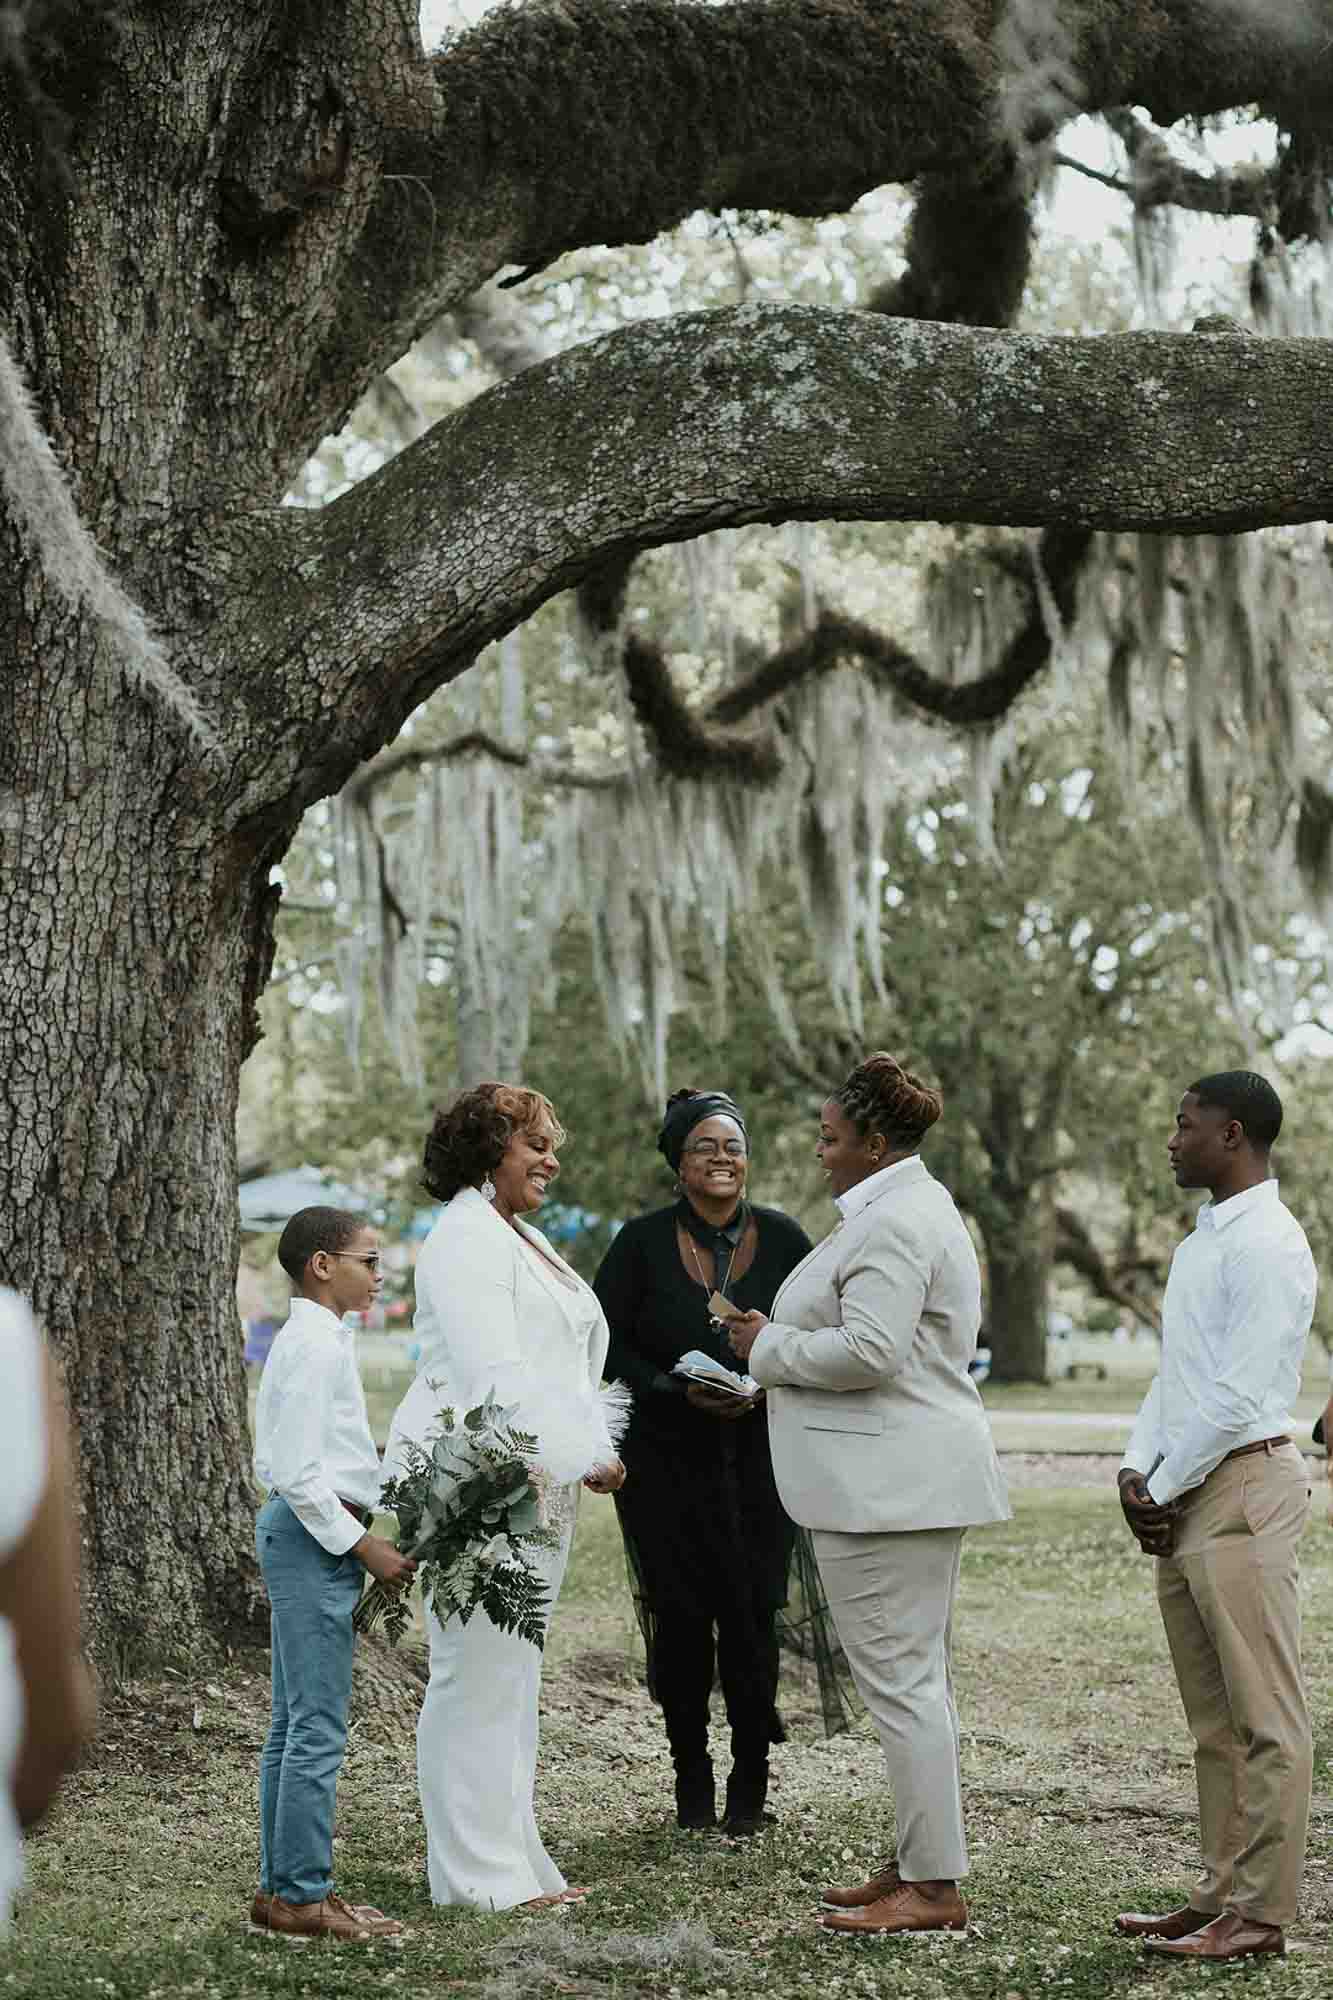 Romantic spring elopement beneath the oak trees of City Park in New Orleans | Olivia Yuen Photography | Featured on Equally Wed, the leading LGBTQ+ wedding magazine